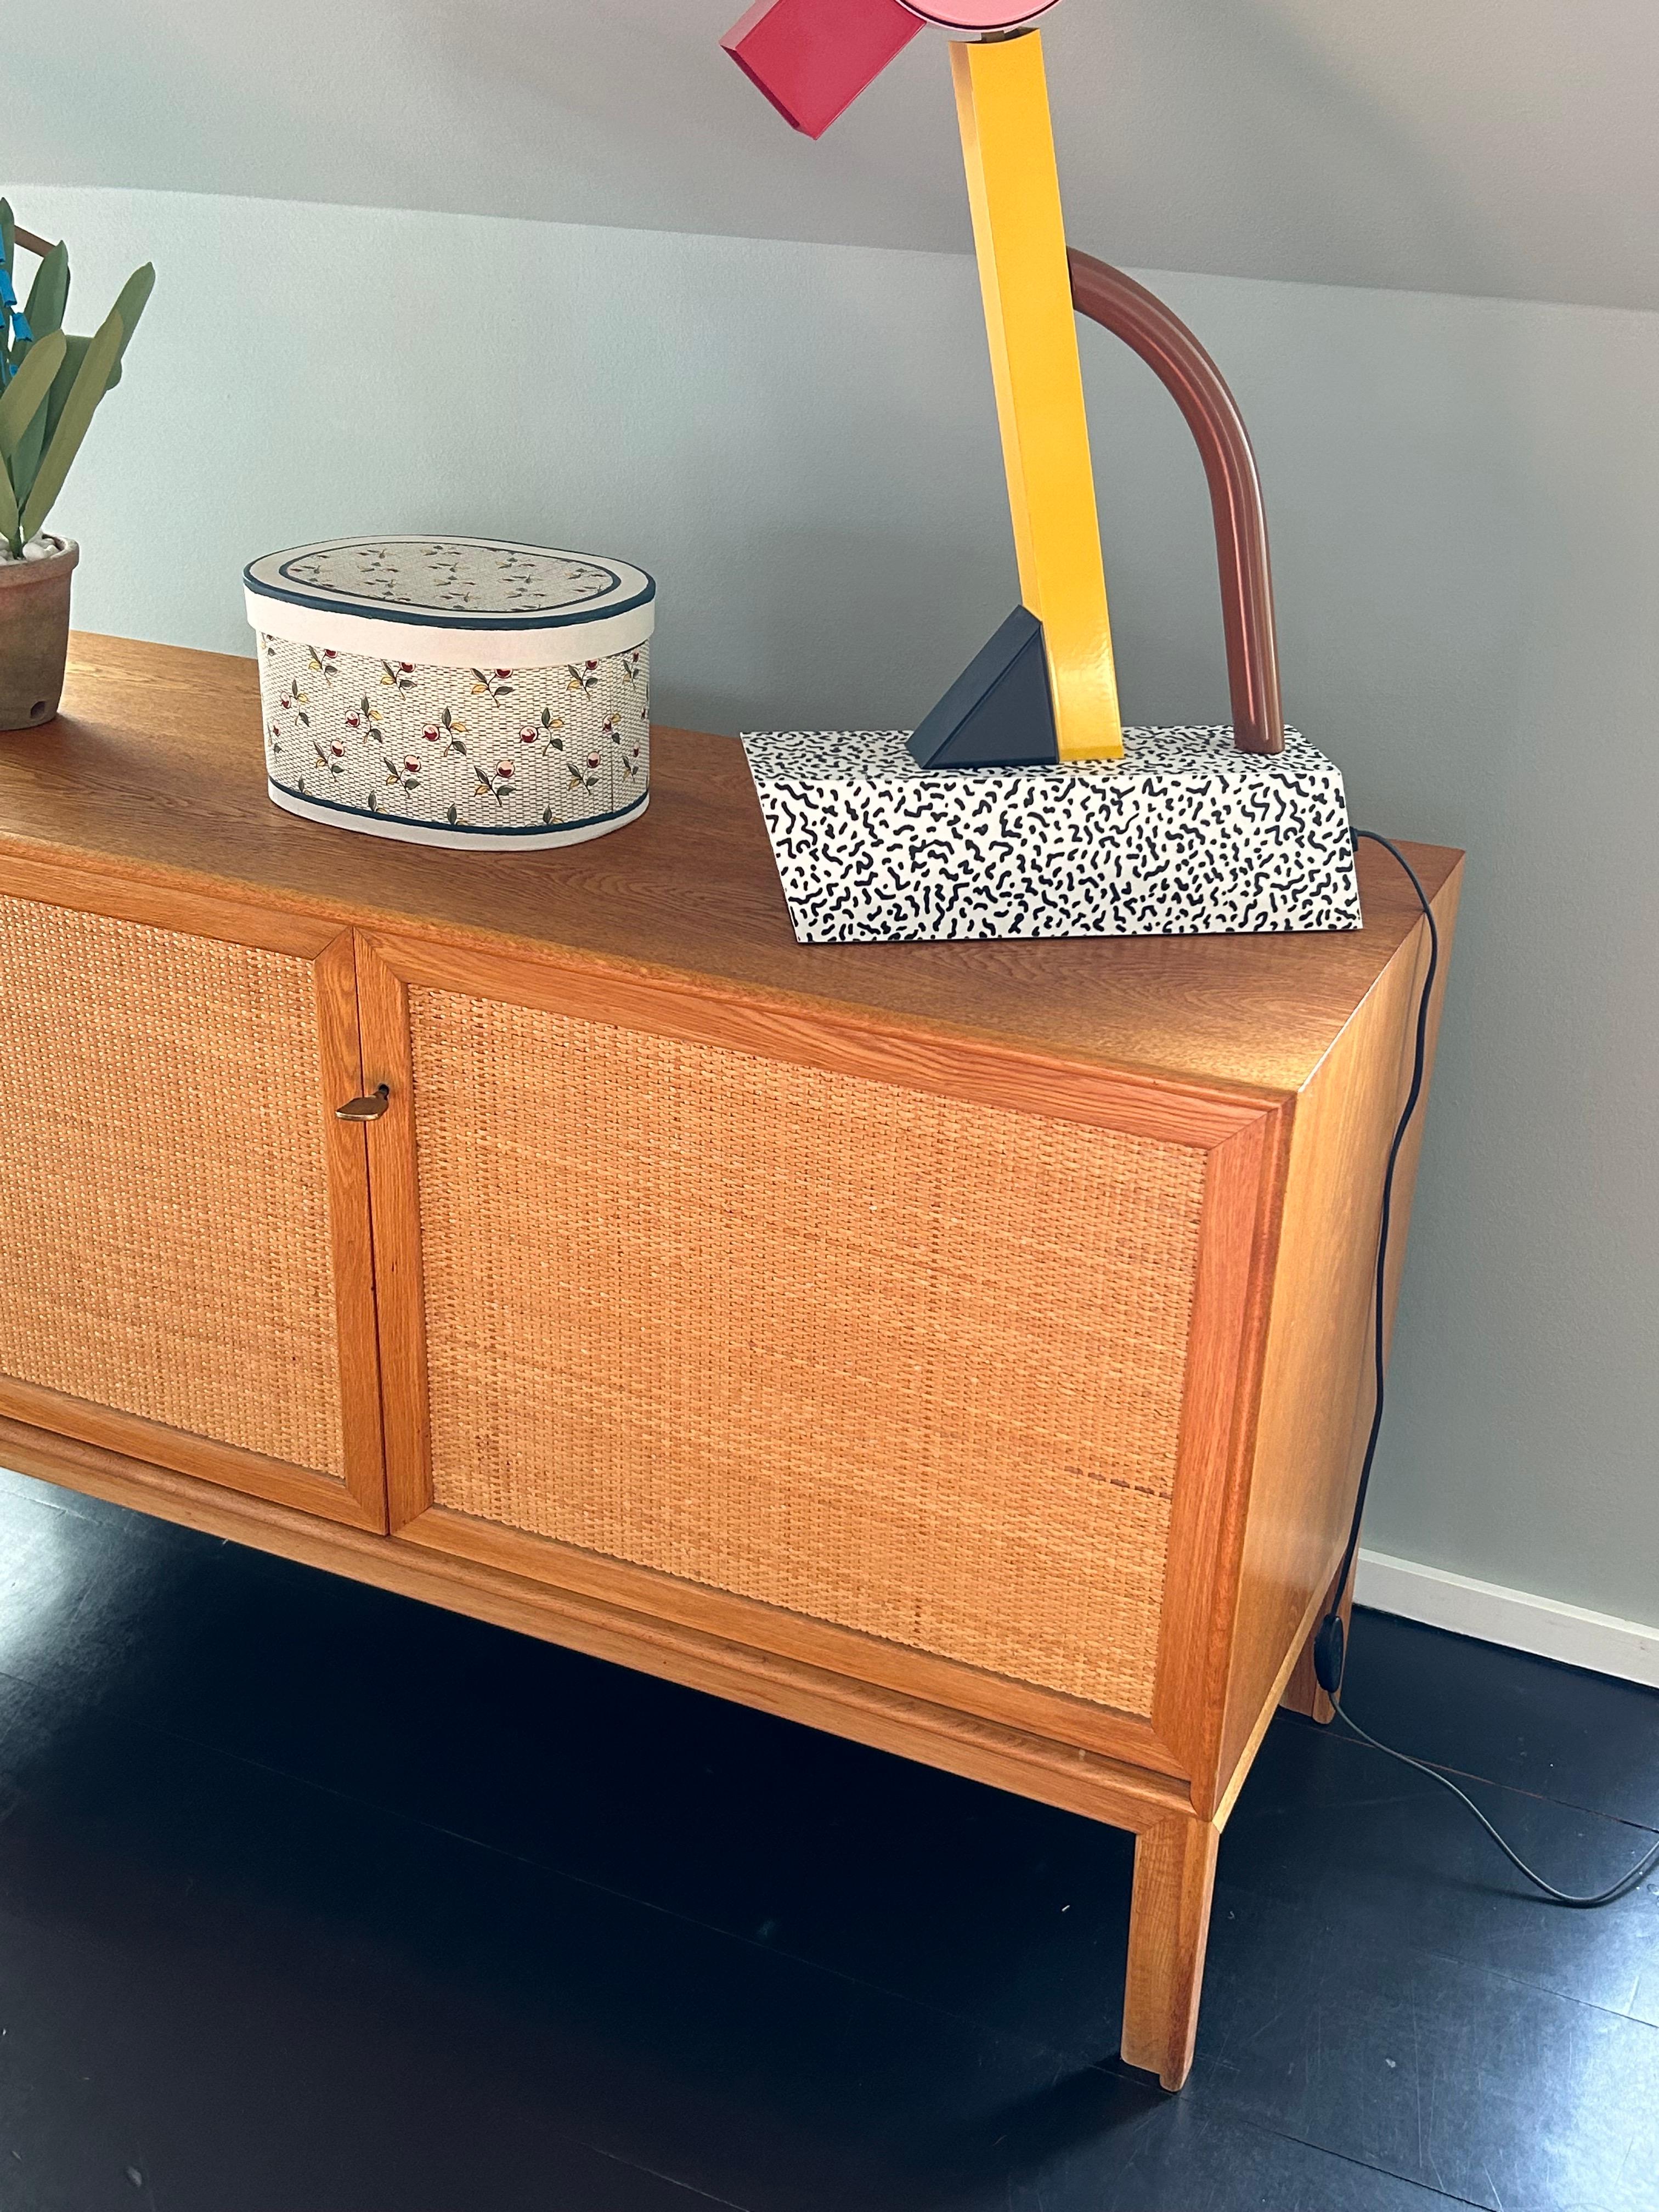 Swedish Vintage Alf Svensson Sideboard in Oak and Cane with Two Doors, Sweden, 1950s For Sale